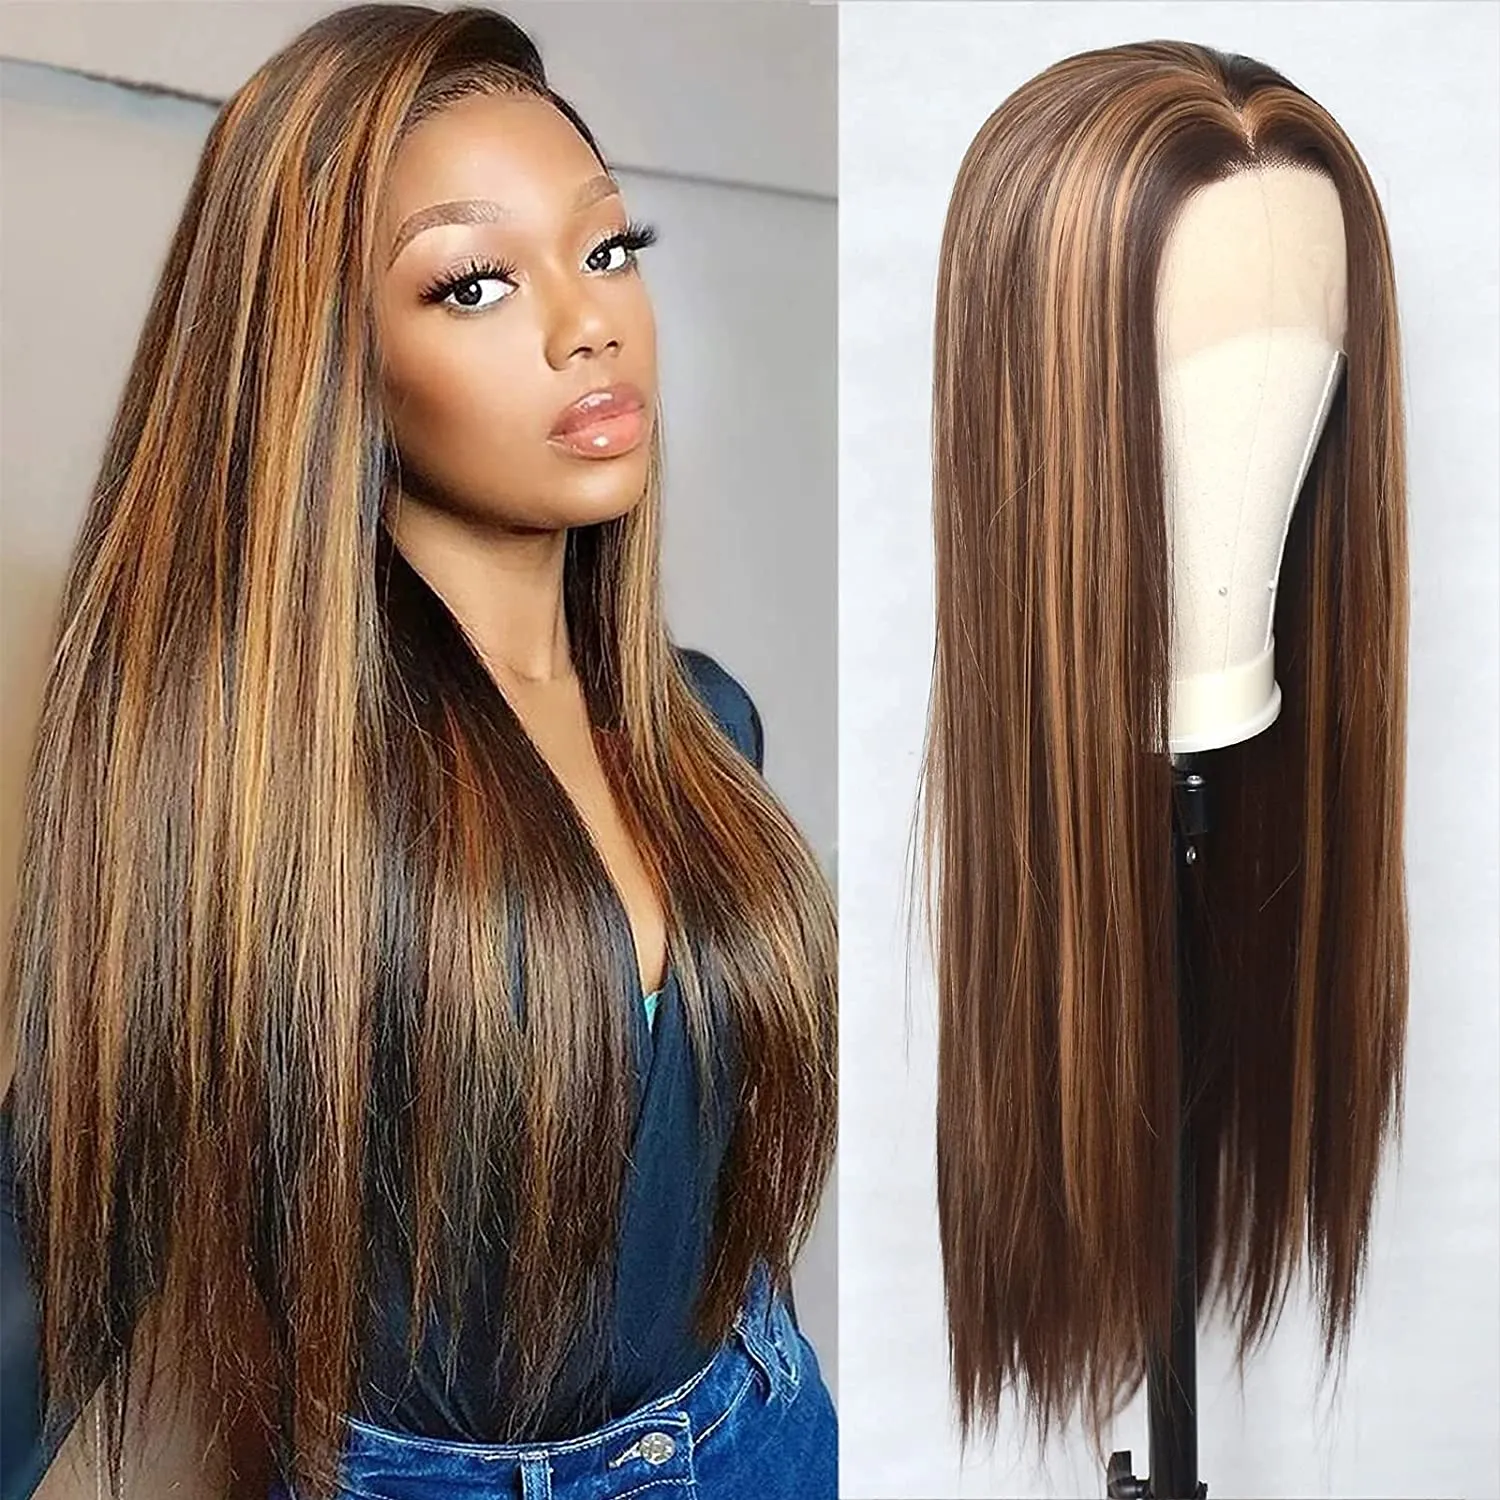 Brown Balayage Silky Straight 13X4 Lace Front Wigs Human Hair Highlight Colored Wigs, 20 Inch Free Part Glueless Pre Plucked 150% Density